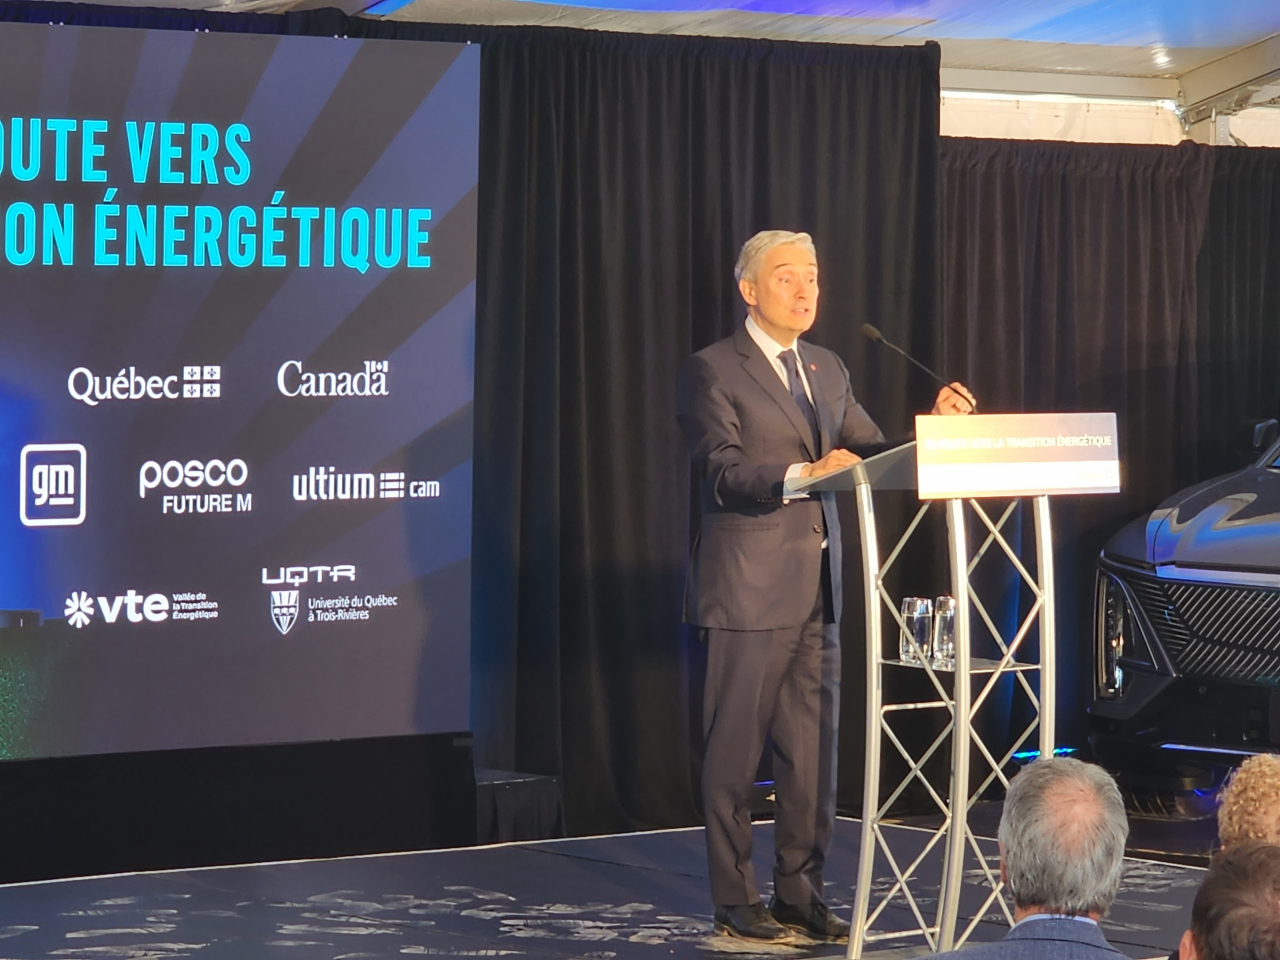 Canadian Industry Minister Francois-Philippe Champagne announces the provincial and federal governments' investment decision at the Ultium Cam's construction site in Quebec on Monday. (Posco Future M)